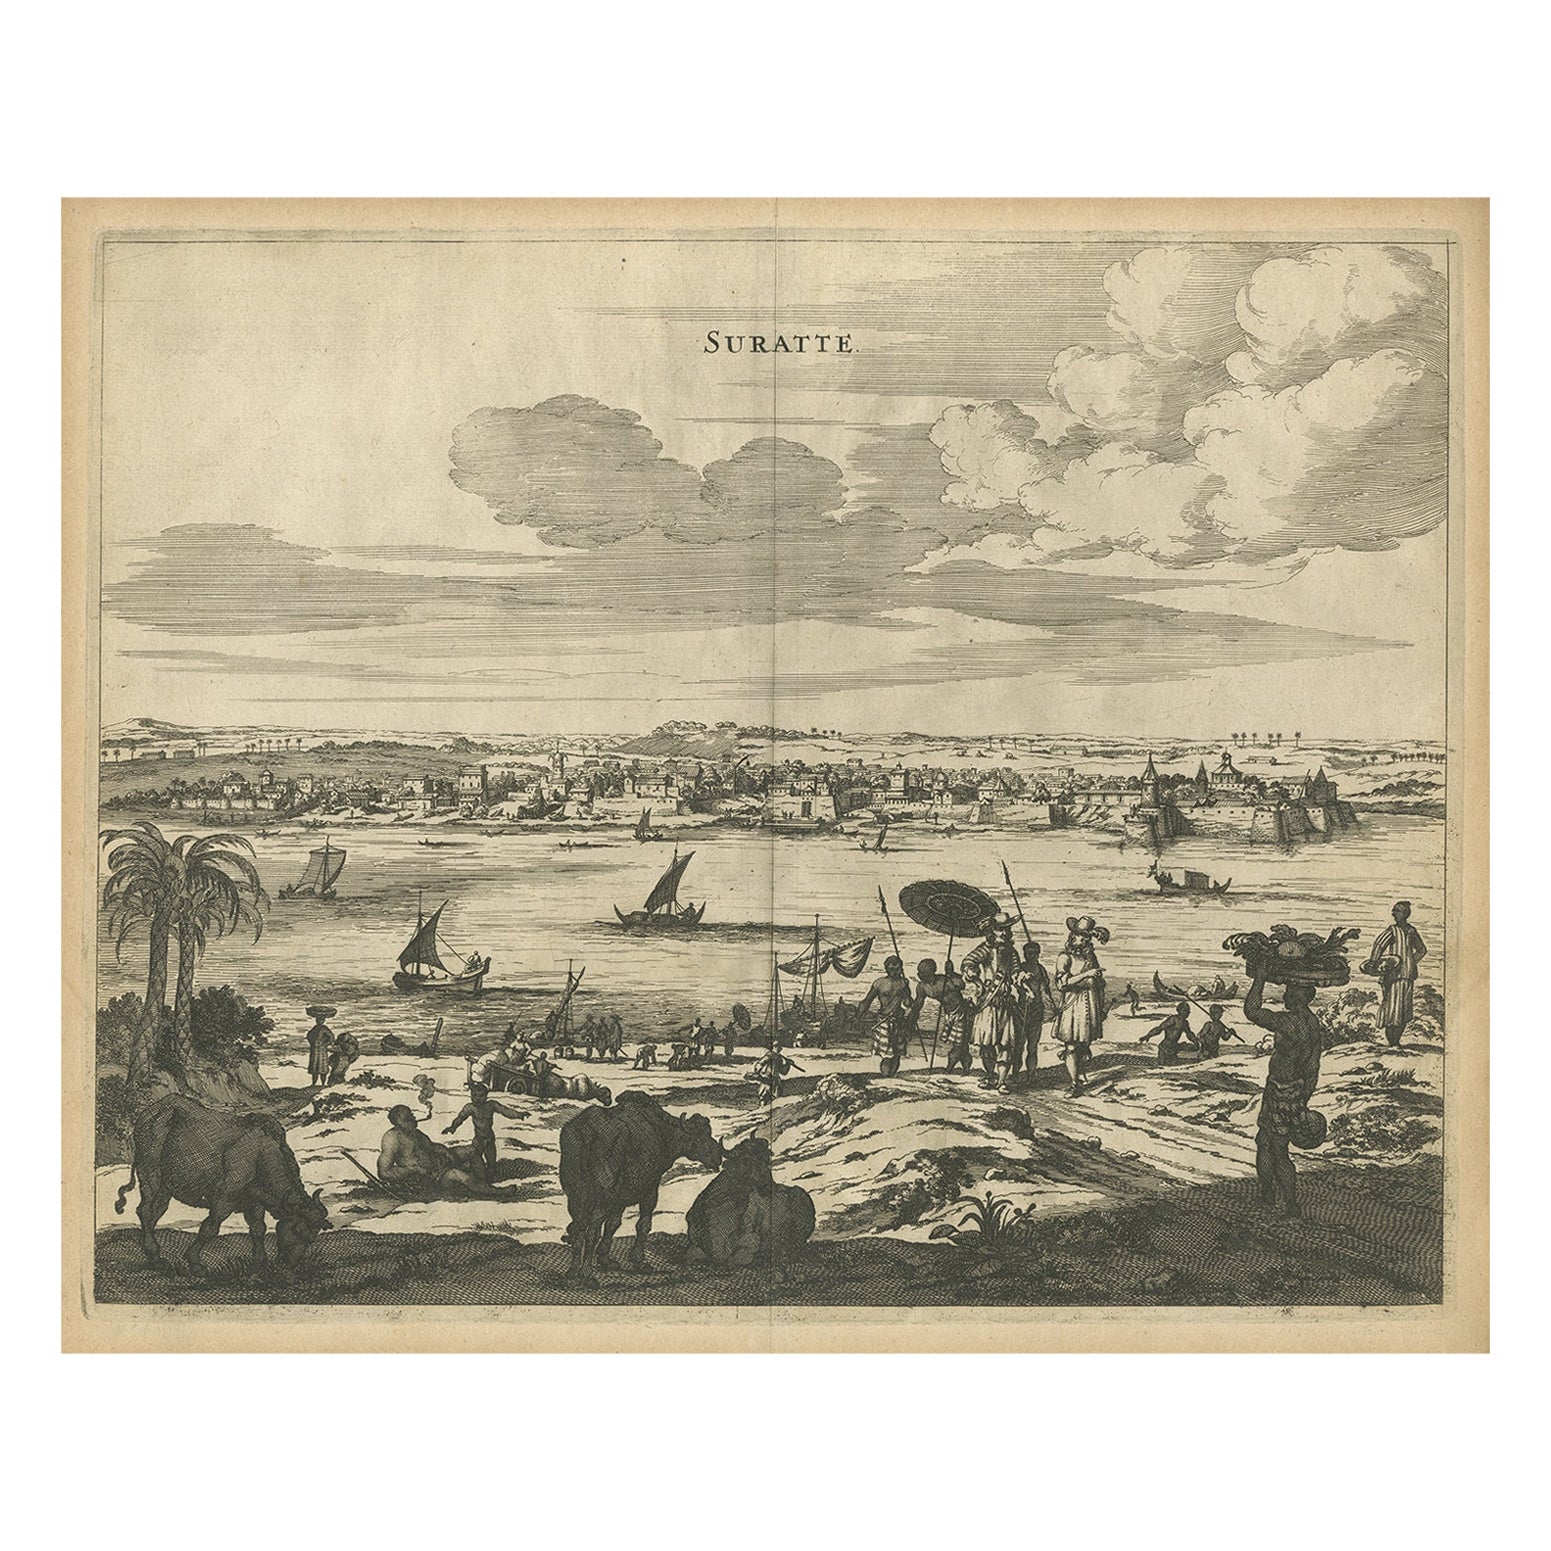 Antique Engraving of a Print Showing the Indian City of Suratte 'Surat', 1672